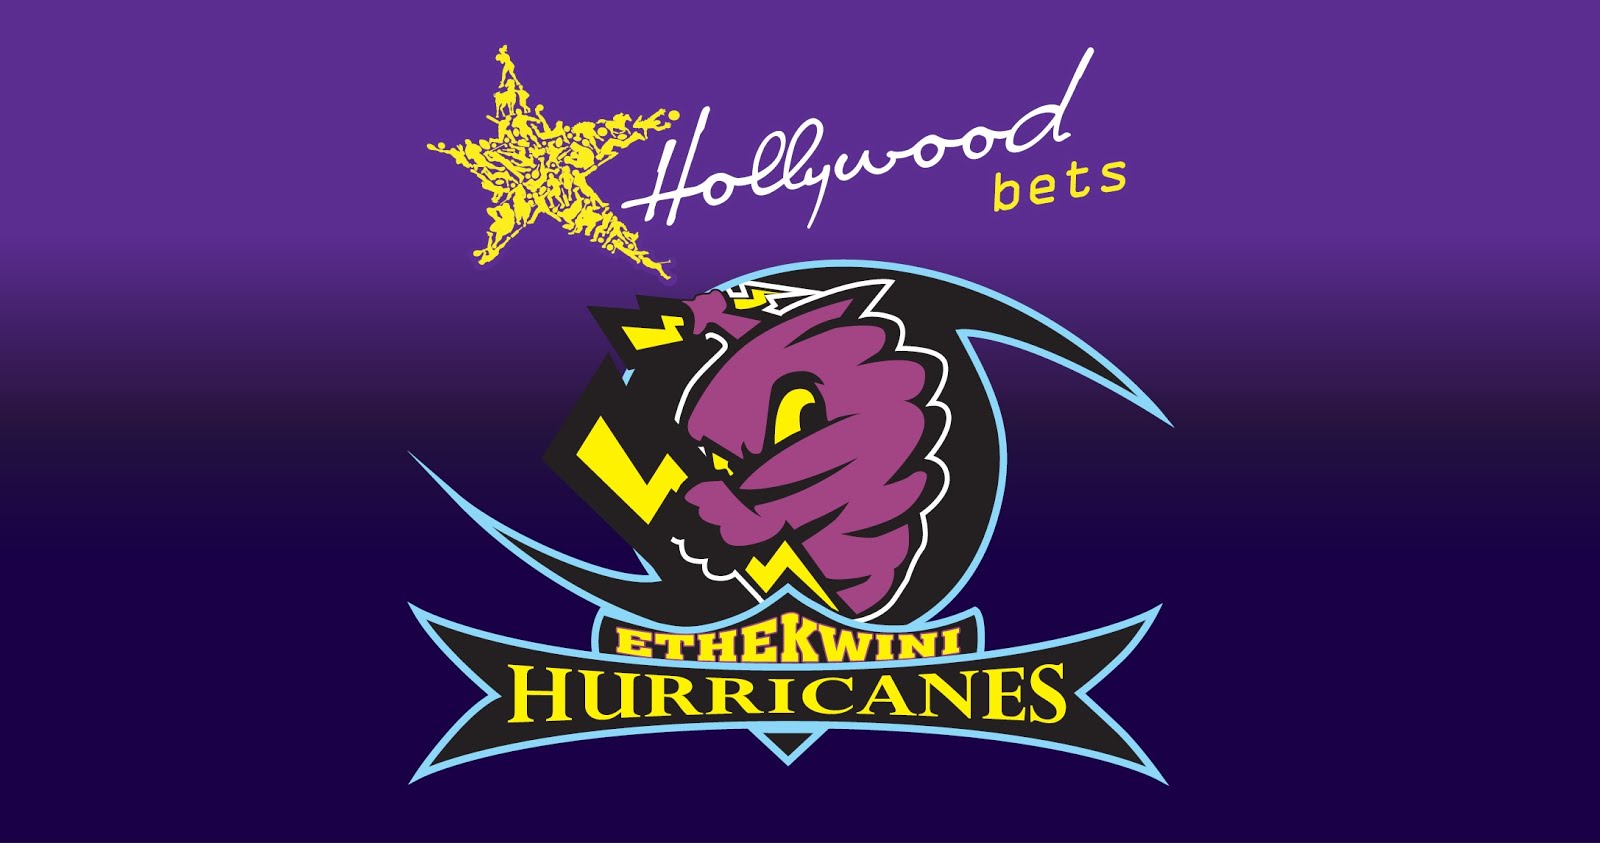 Hollywoodbets eThekwini Hurricanes - Hollywoodbets Dolphins Premier League presented by Aucor